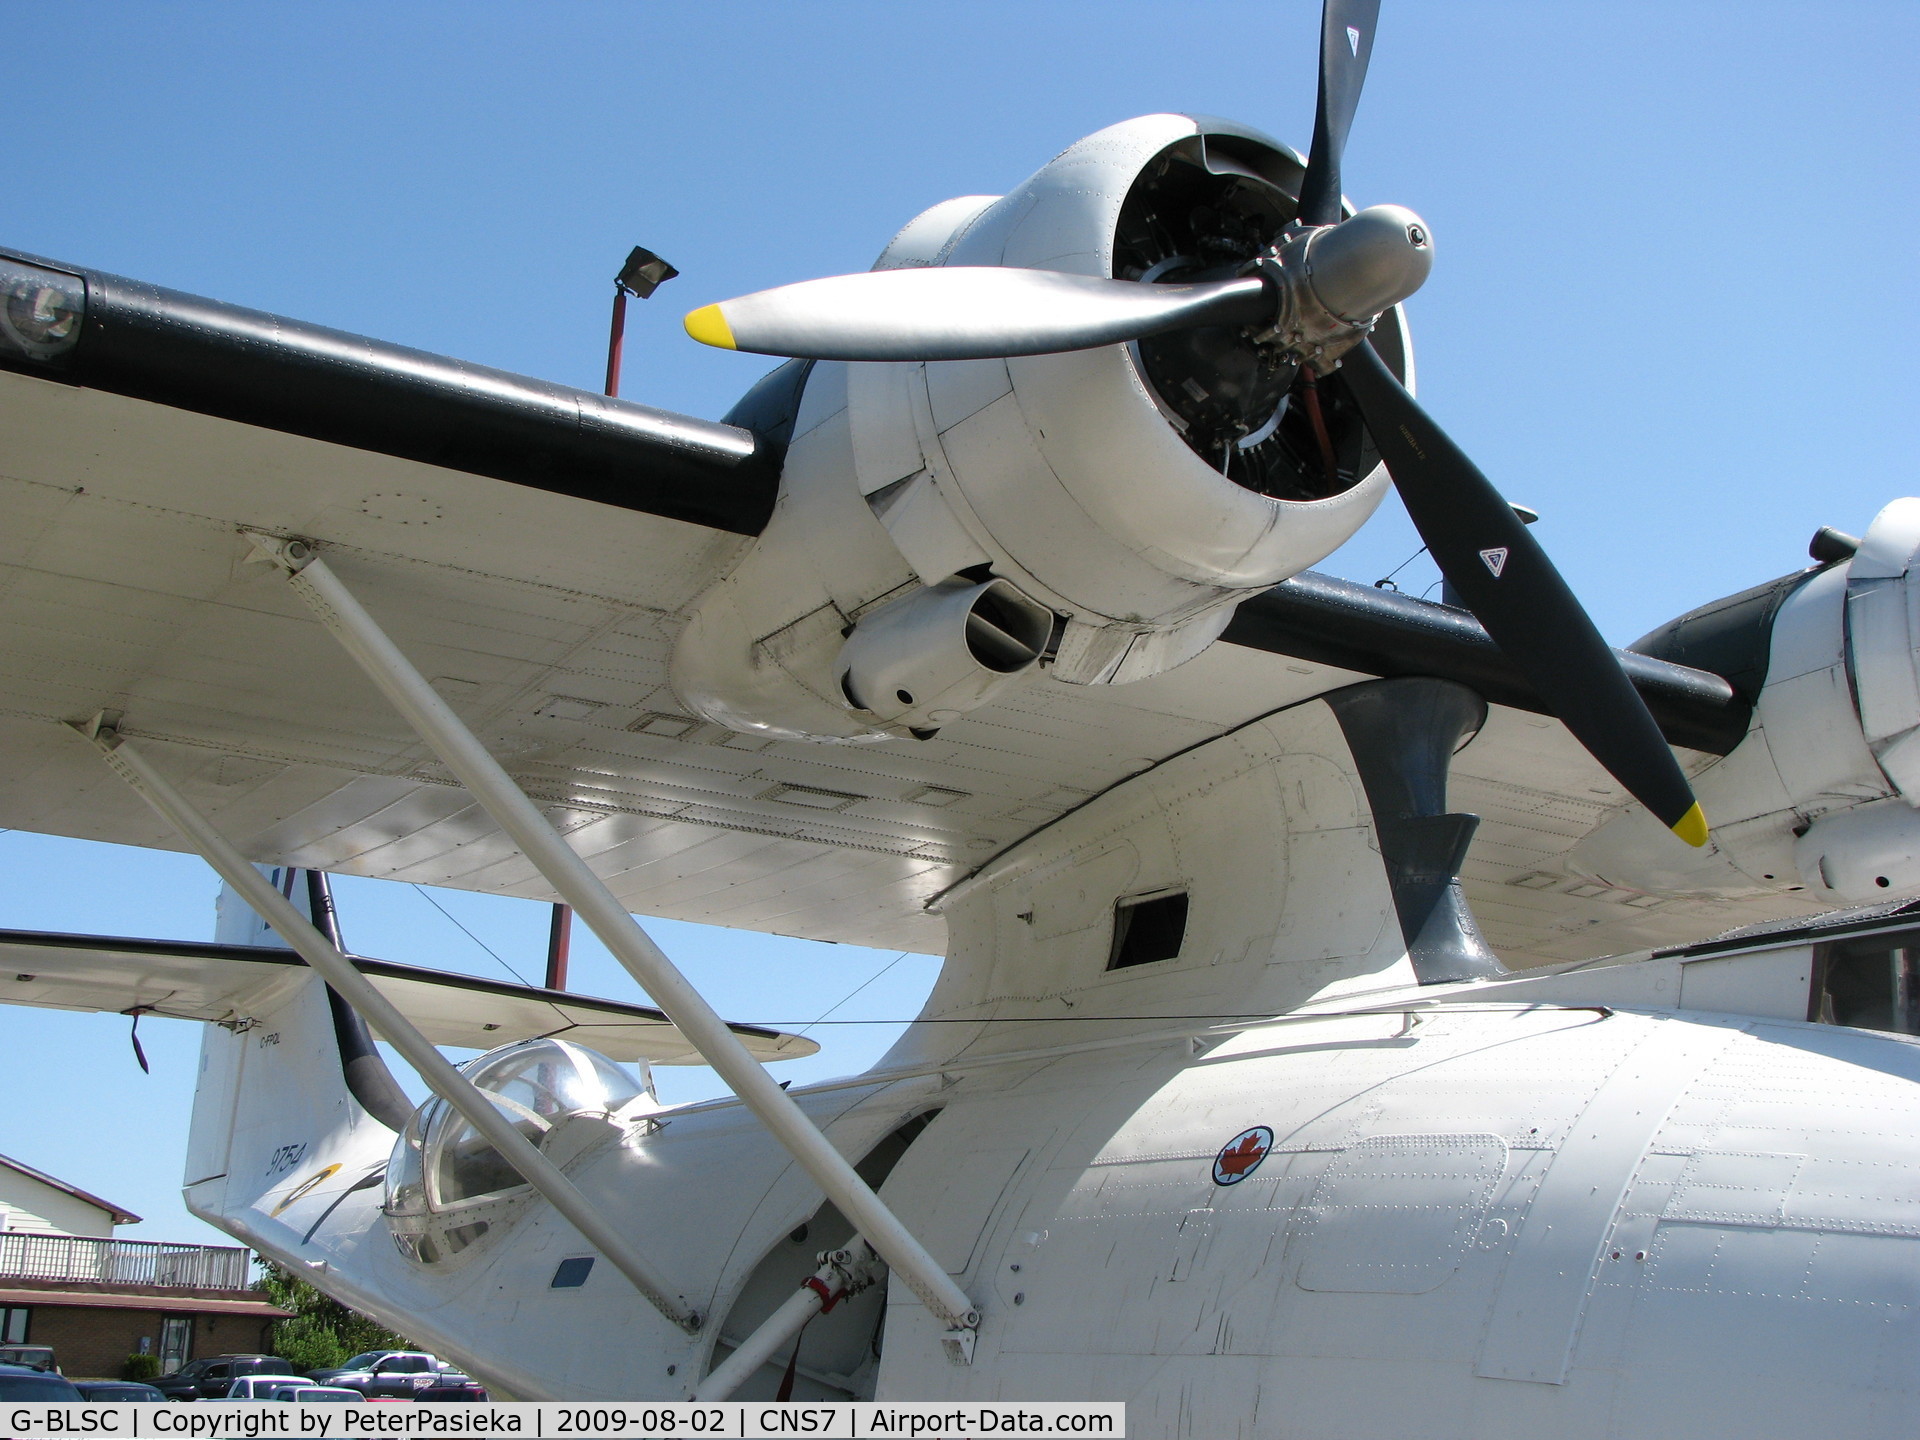 G-BLSC, 1944 Consolidated PBY-5A Catalina C/N 1997, PBY @ Kincardine Fly-in